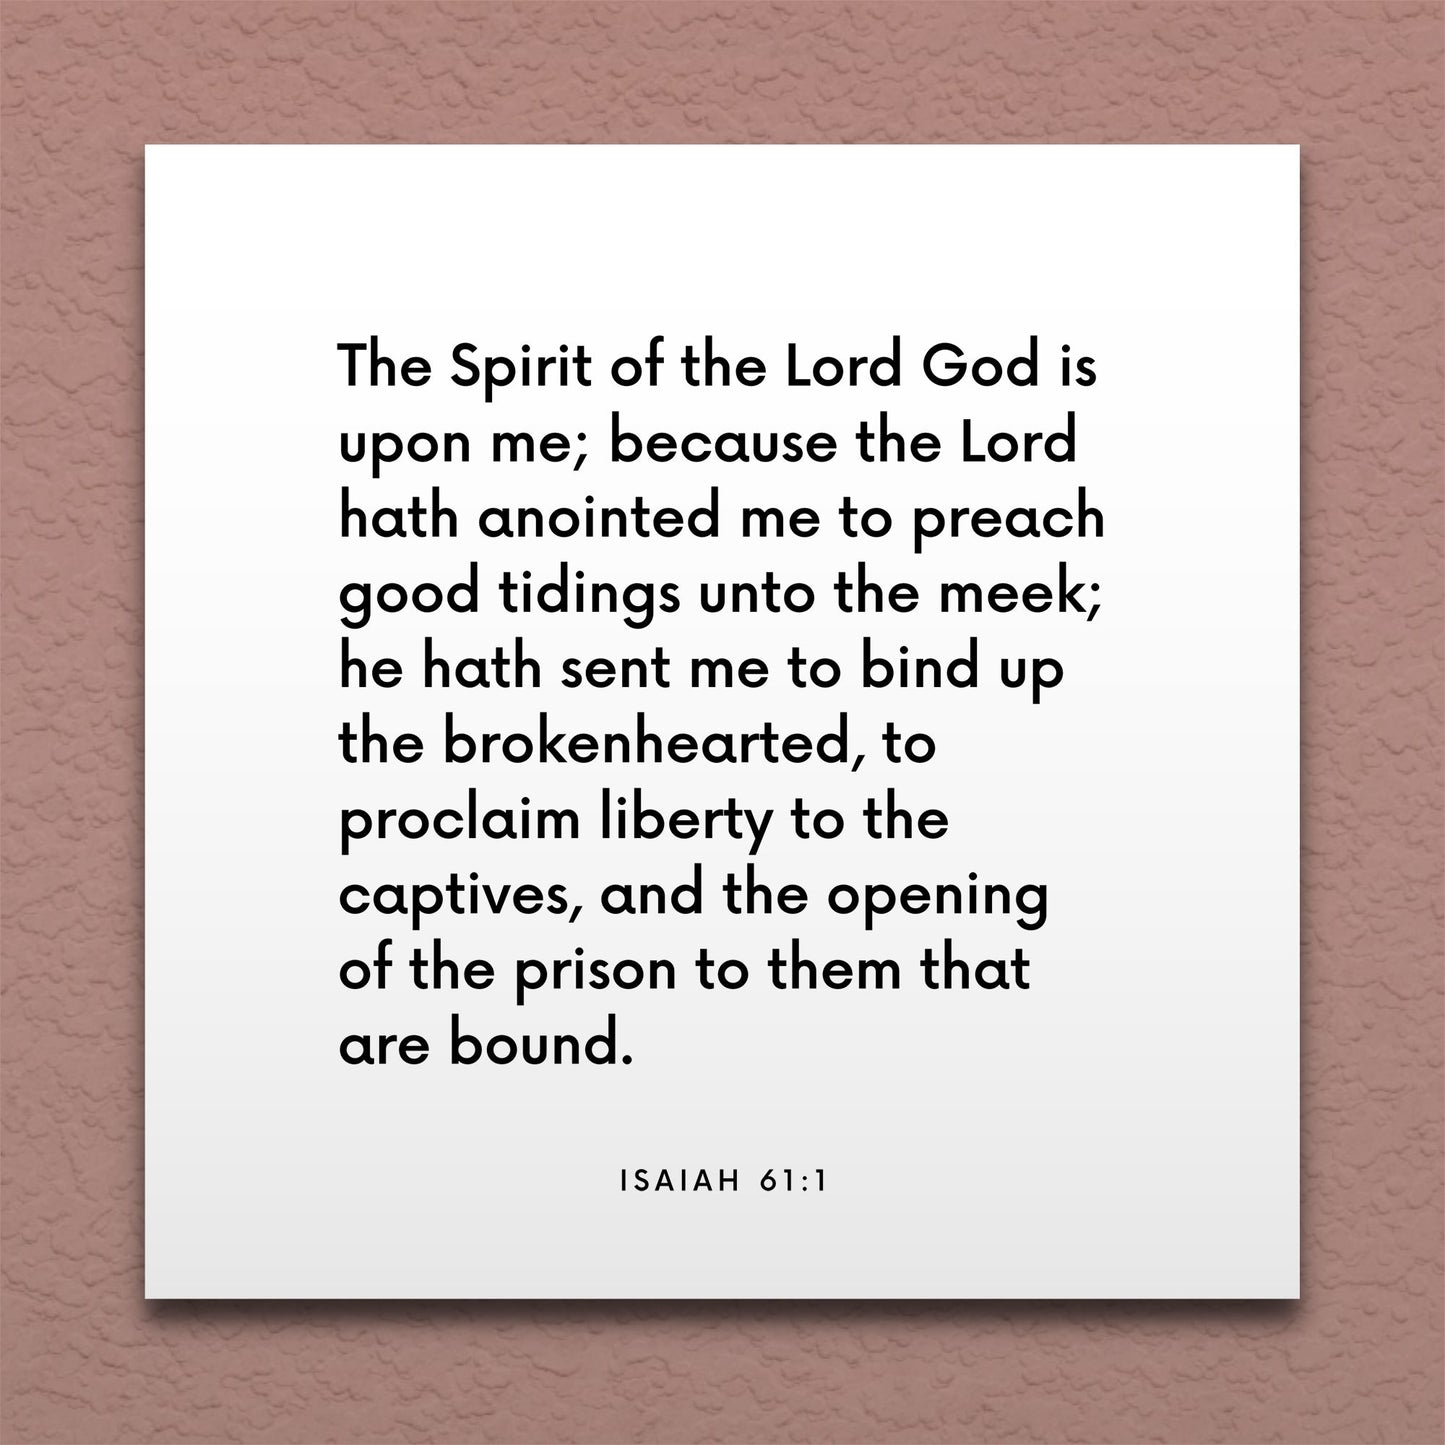 Wall-mounted scripture tile for Isaiah 61:1 - "He hath sent me to bind up the brokenhearted"